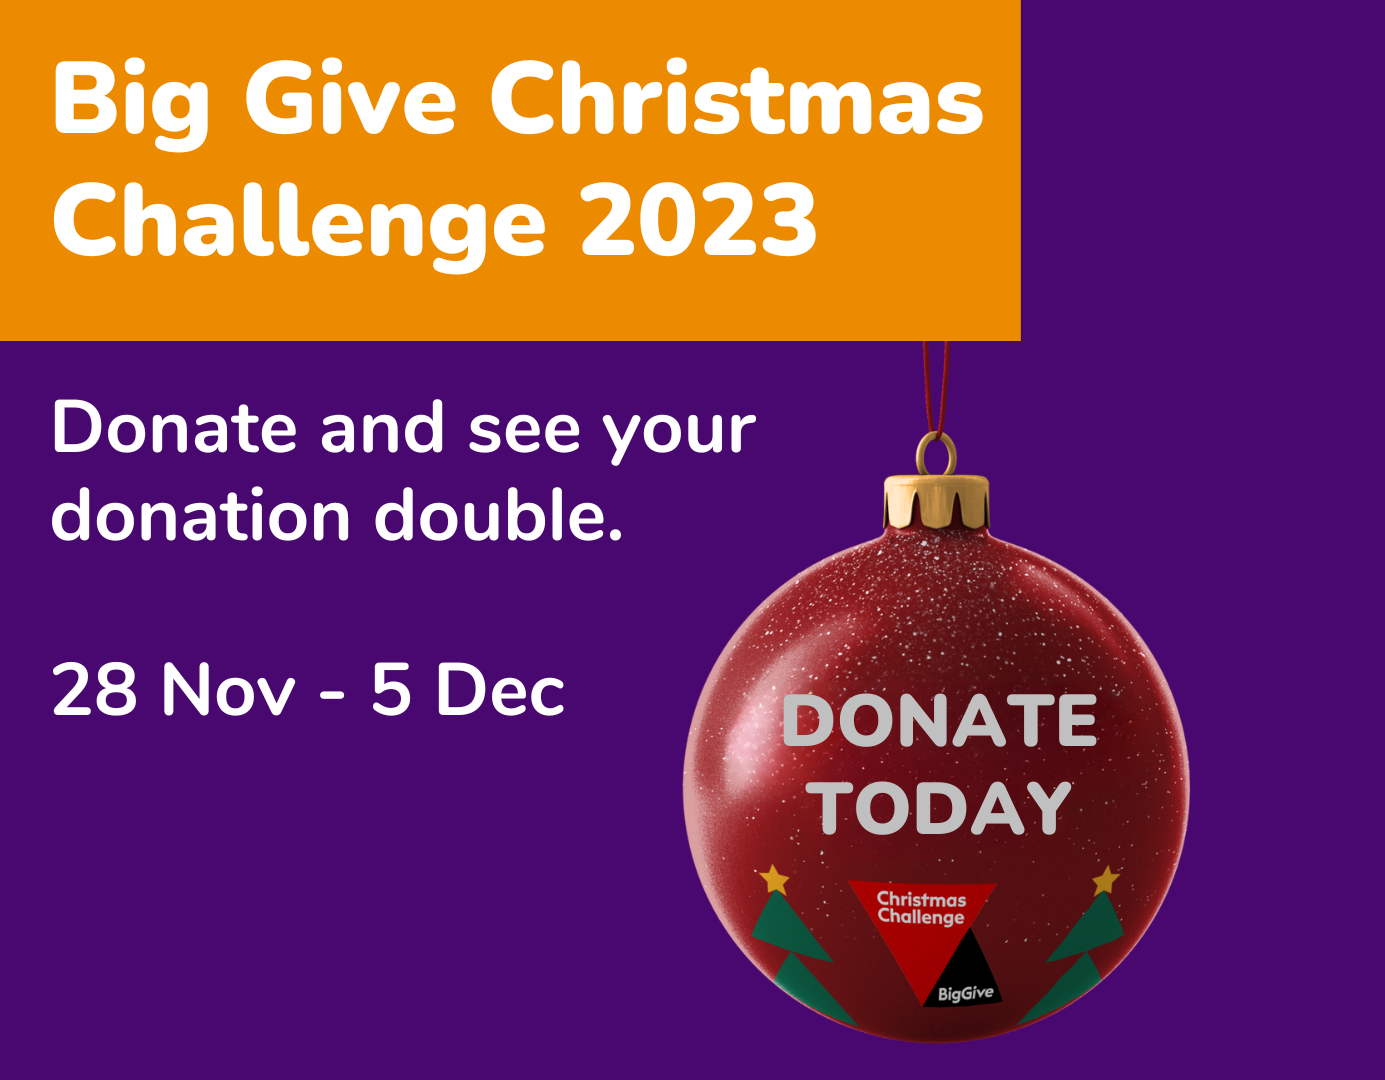 Big Give Christmas Challenge 2023 donate and see your donation double